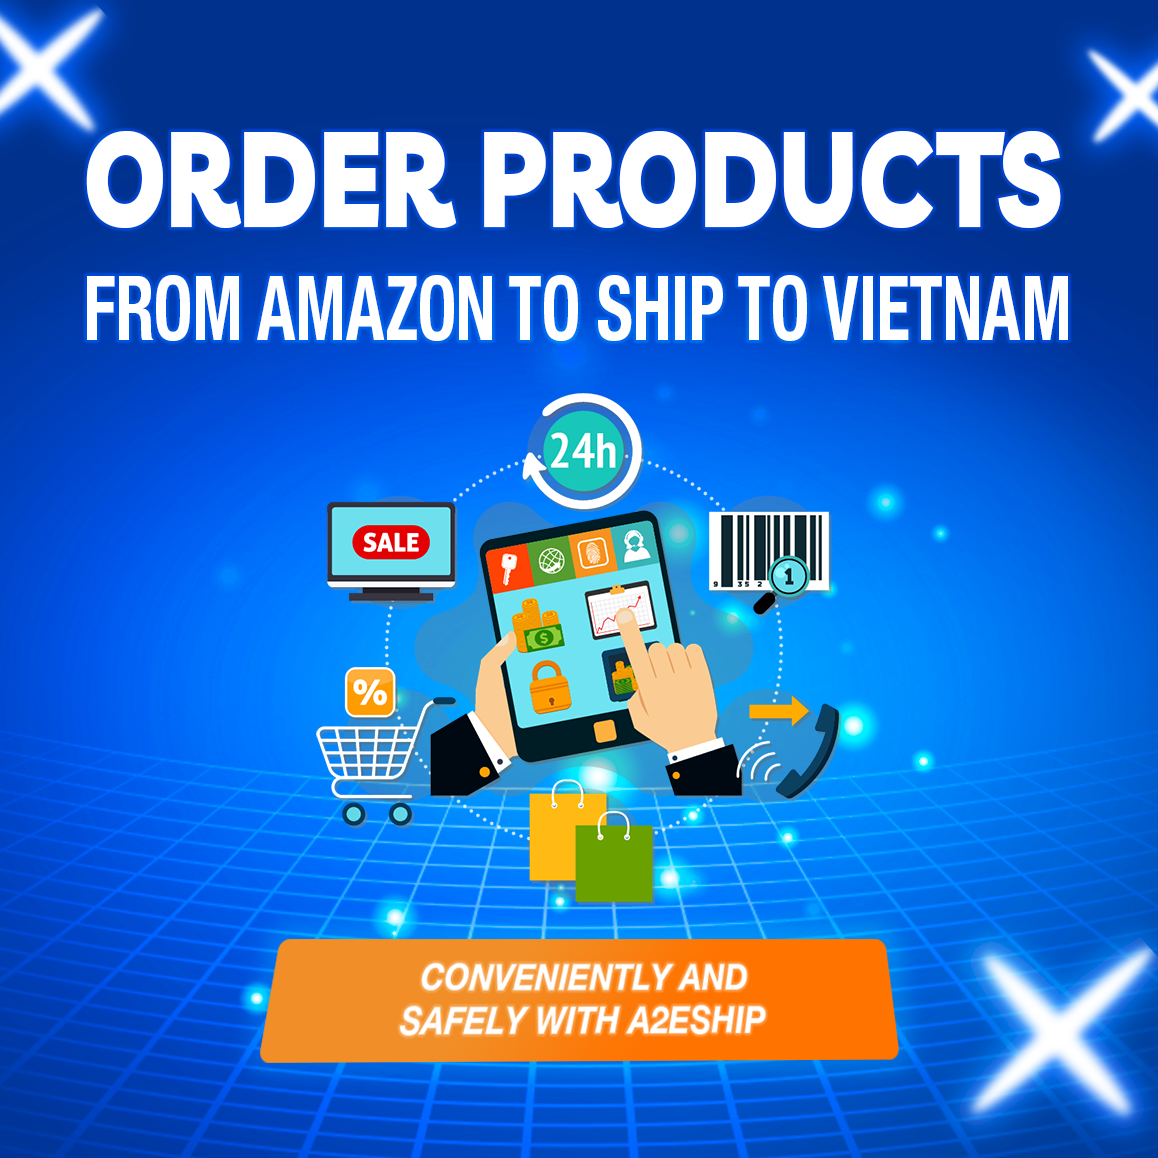 How to order products from Amazon to ship to Vietnam conveniently and safely with A2E SHIP